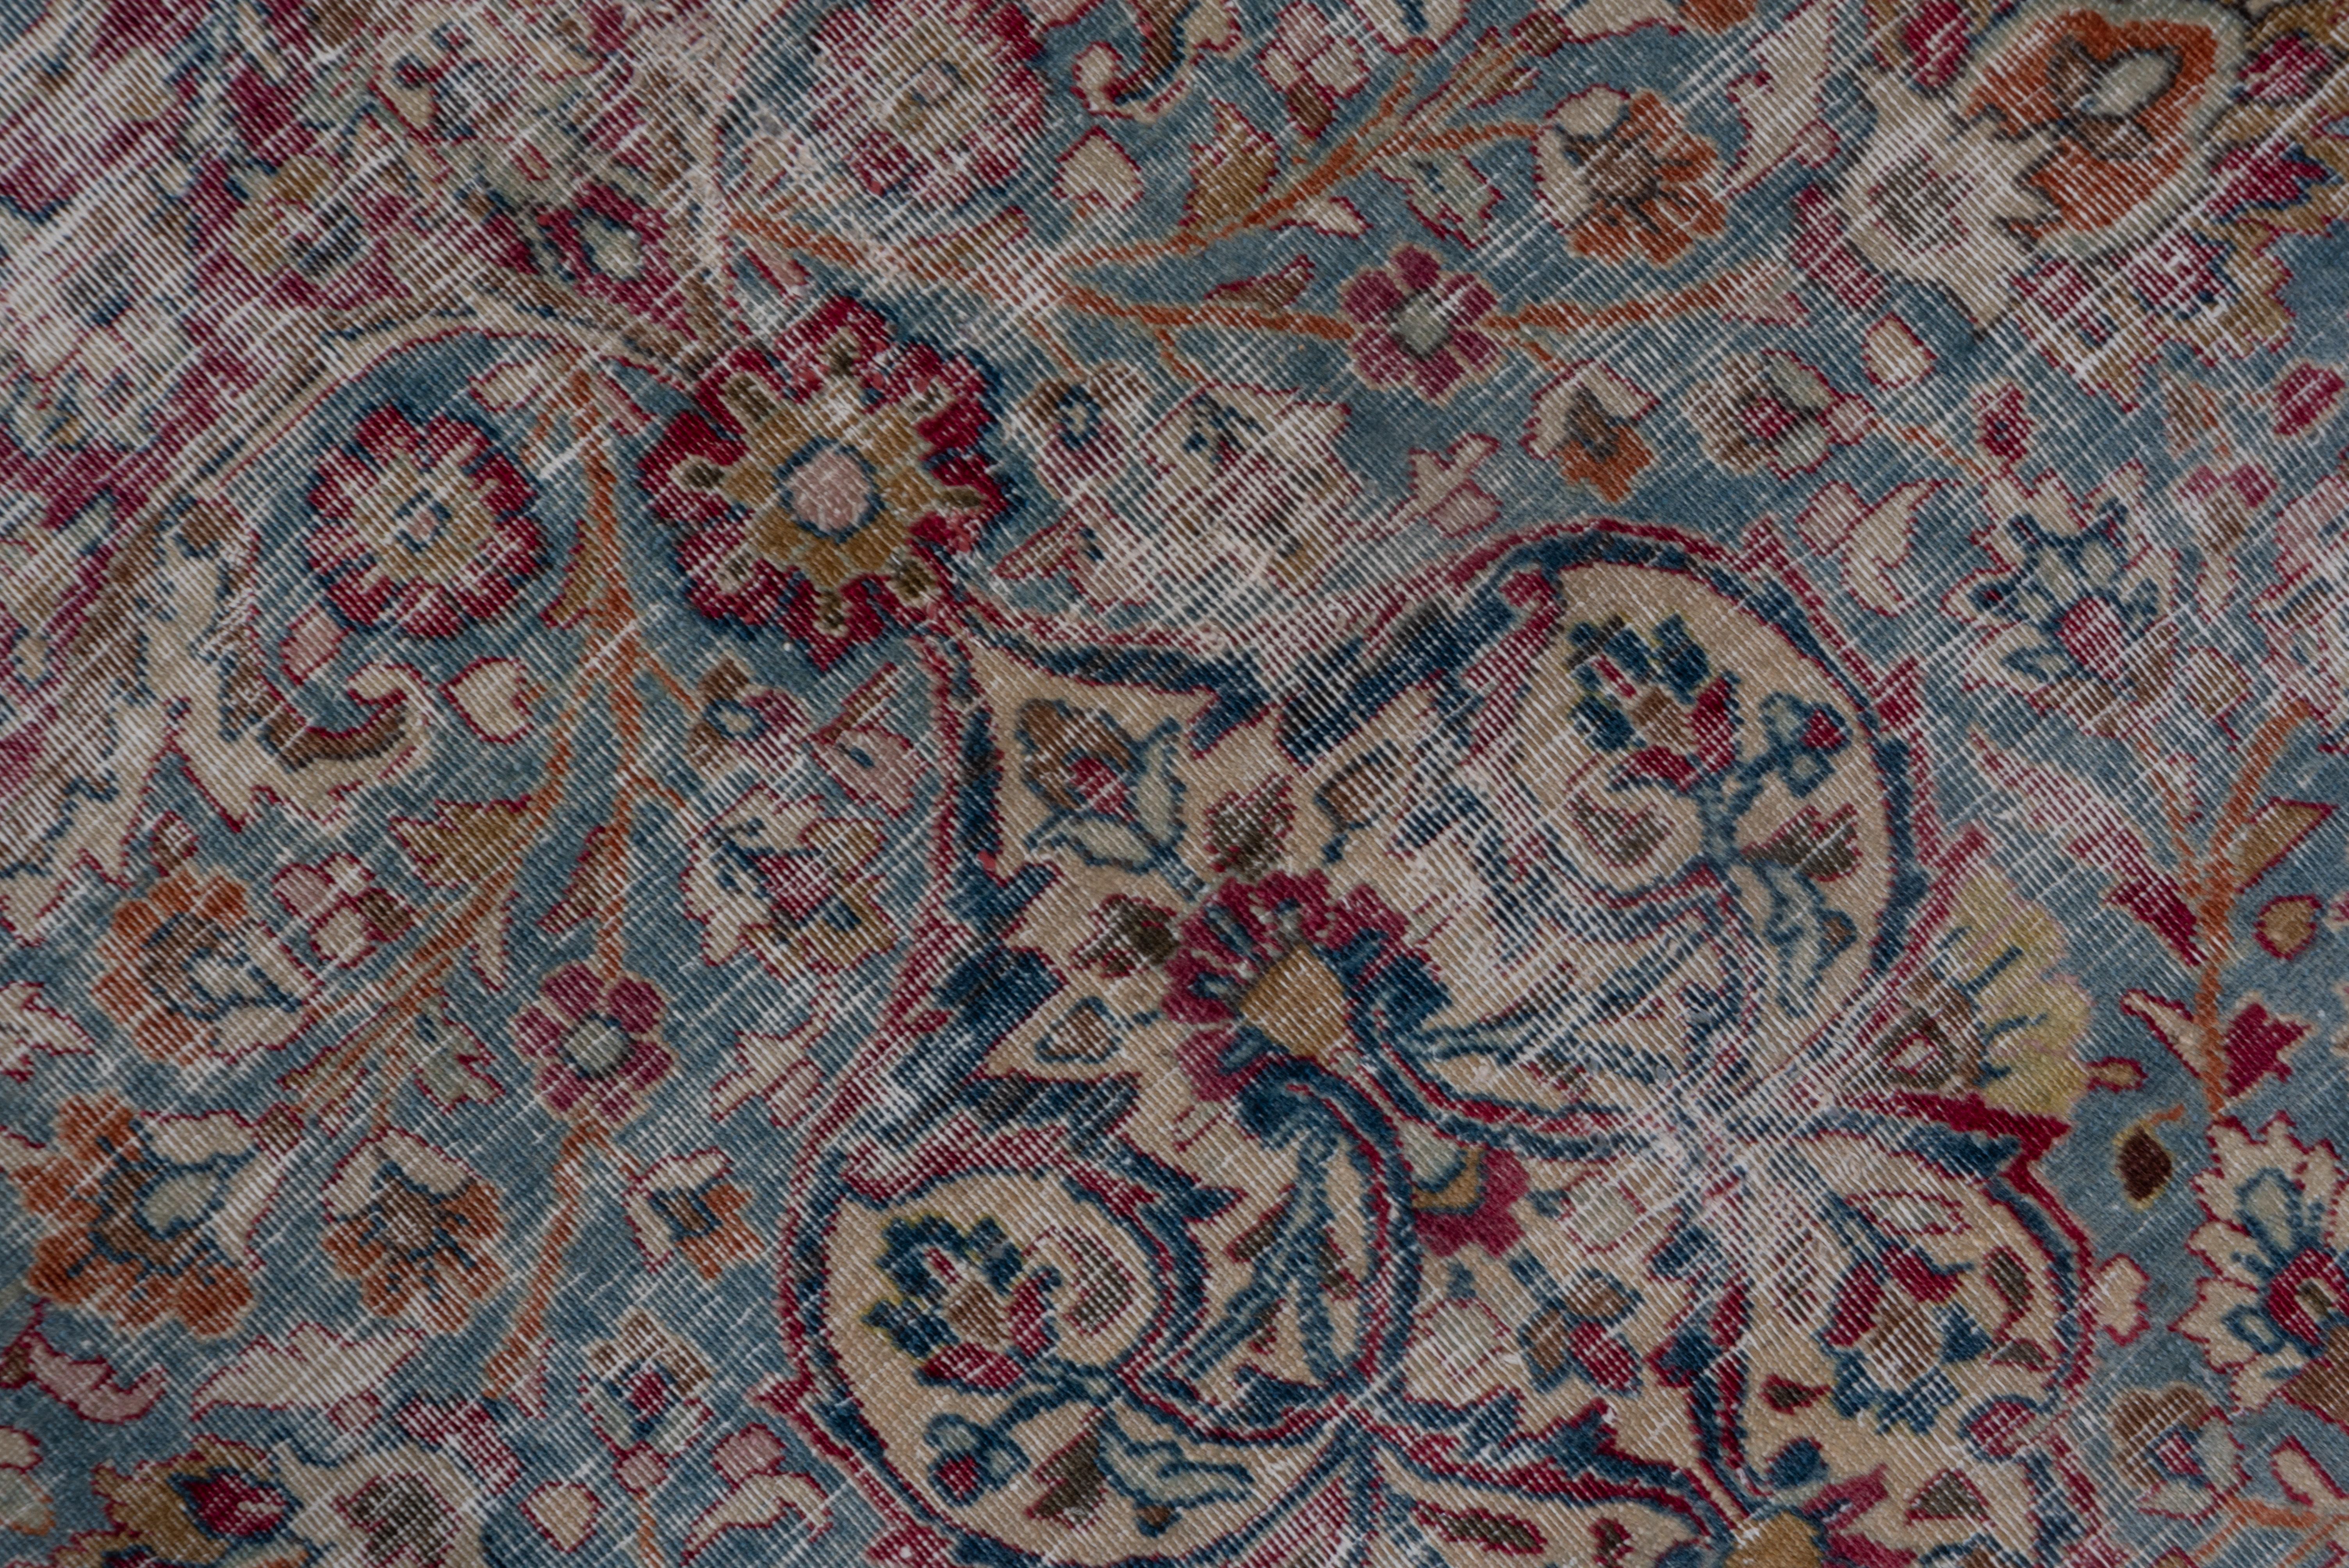 This NE Persian carpet shows a pointed and lobed doubly pendanted round sand medallion with interior forked arabesques, all set on a shaped teal Sub-field, surrounded by a dark wine ground and tonally similar main border of double tendrils and petal